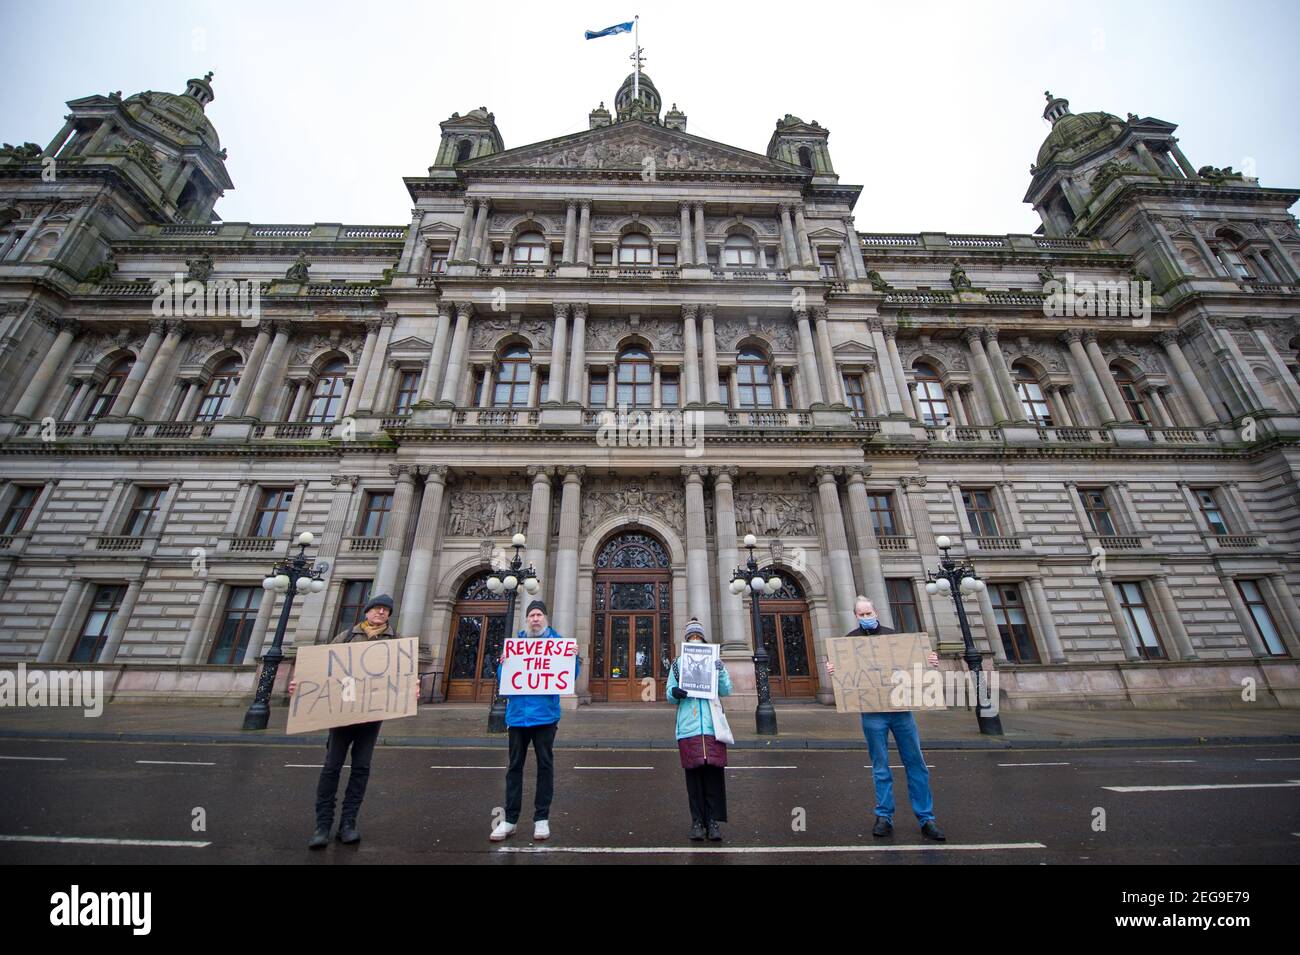 Glasgow Scotland, UK. 18 February 2021. Pictured: (L-R) Gordon Walker - Water Petitioner; Eric Chester; Sean Clerkin; Susan. Credit: Colin Fisher/Alamy Live News. Stock Photo